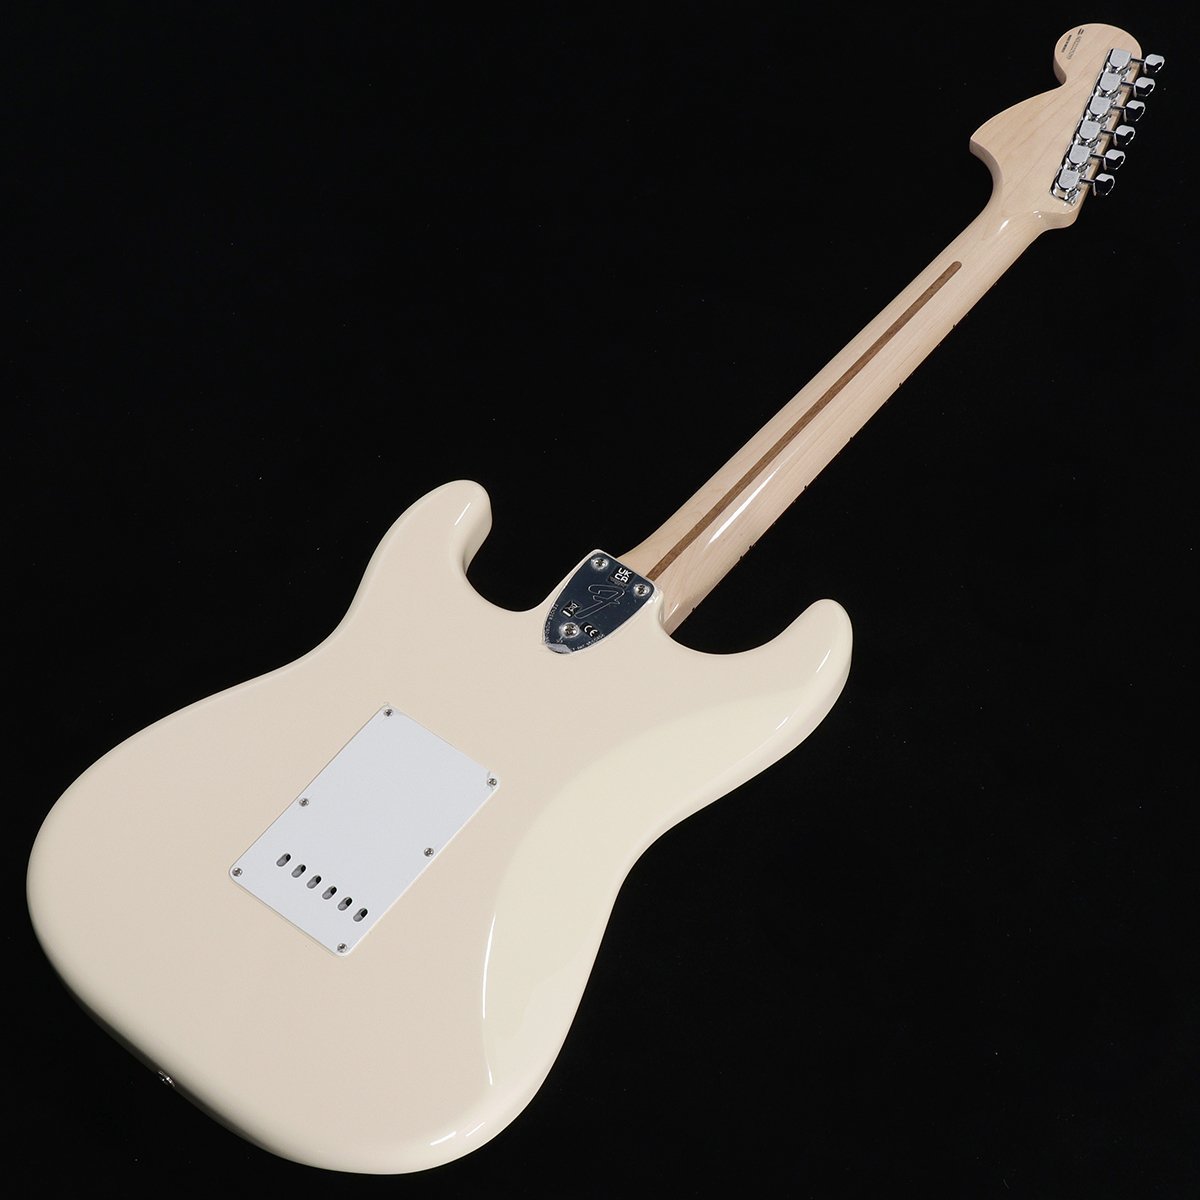 FENDER　リッチーブラックモア(YRK)(+4582600680067)　フェンダー　Olympic　Scalloped　ギター　Fender　Rosewood/FB　Ritchie　Blackmore　Stratocaster　White